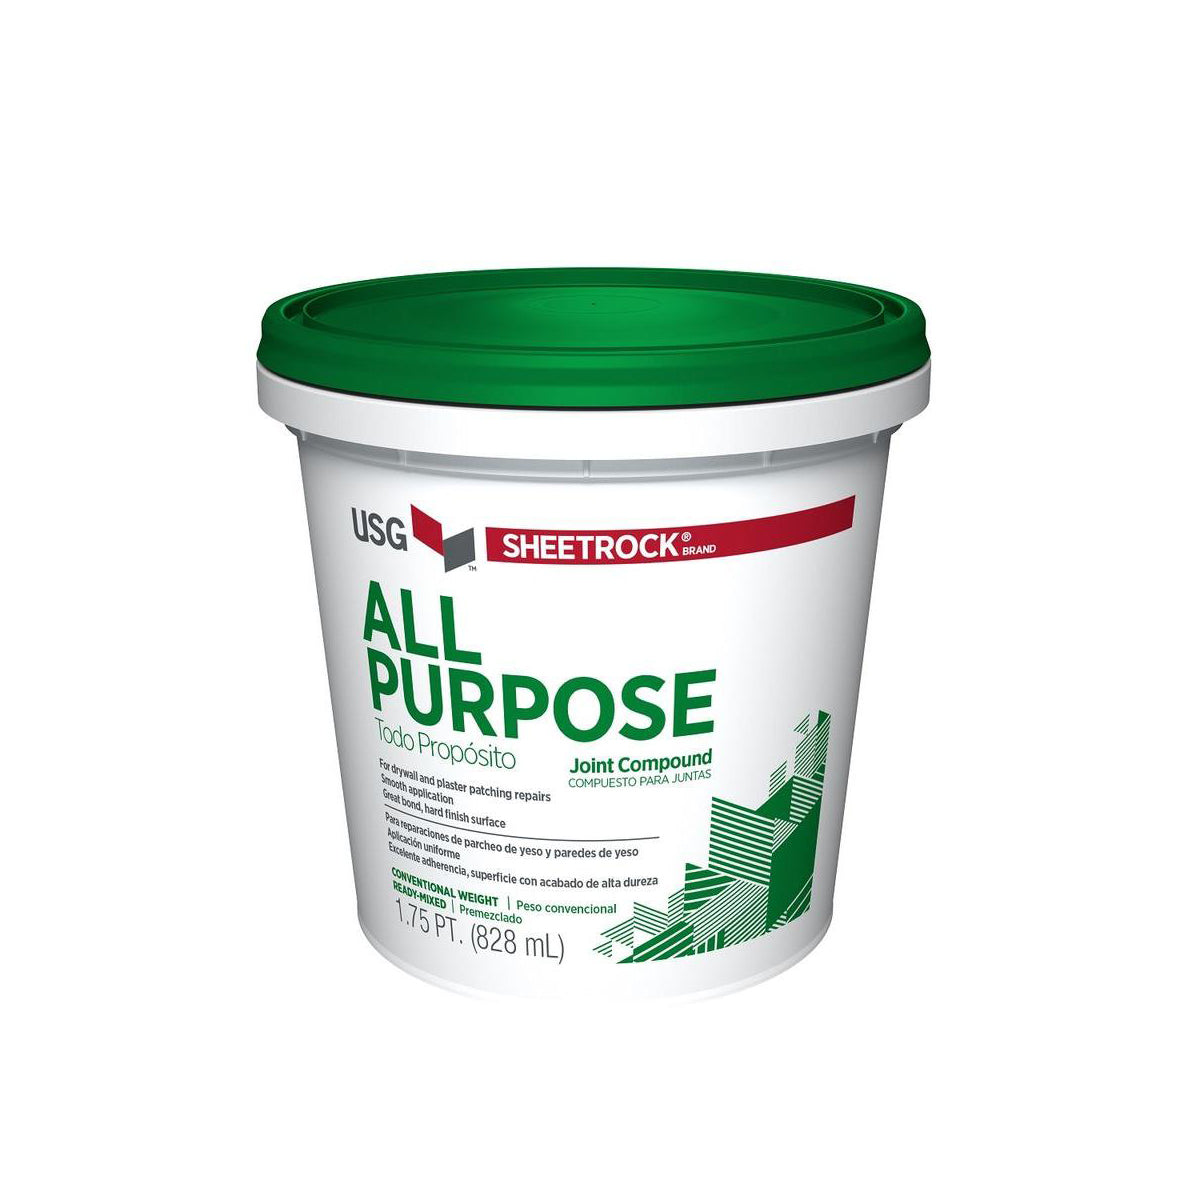 Sheetrock All-Purpose Joint Compound, available at Harris Paints and BH Paints in the Caribbean.